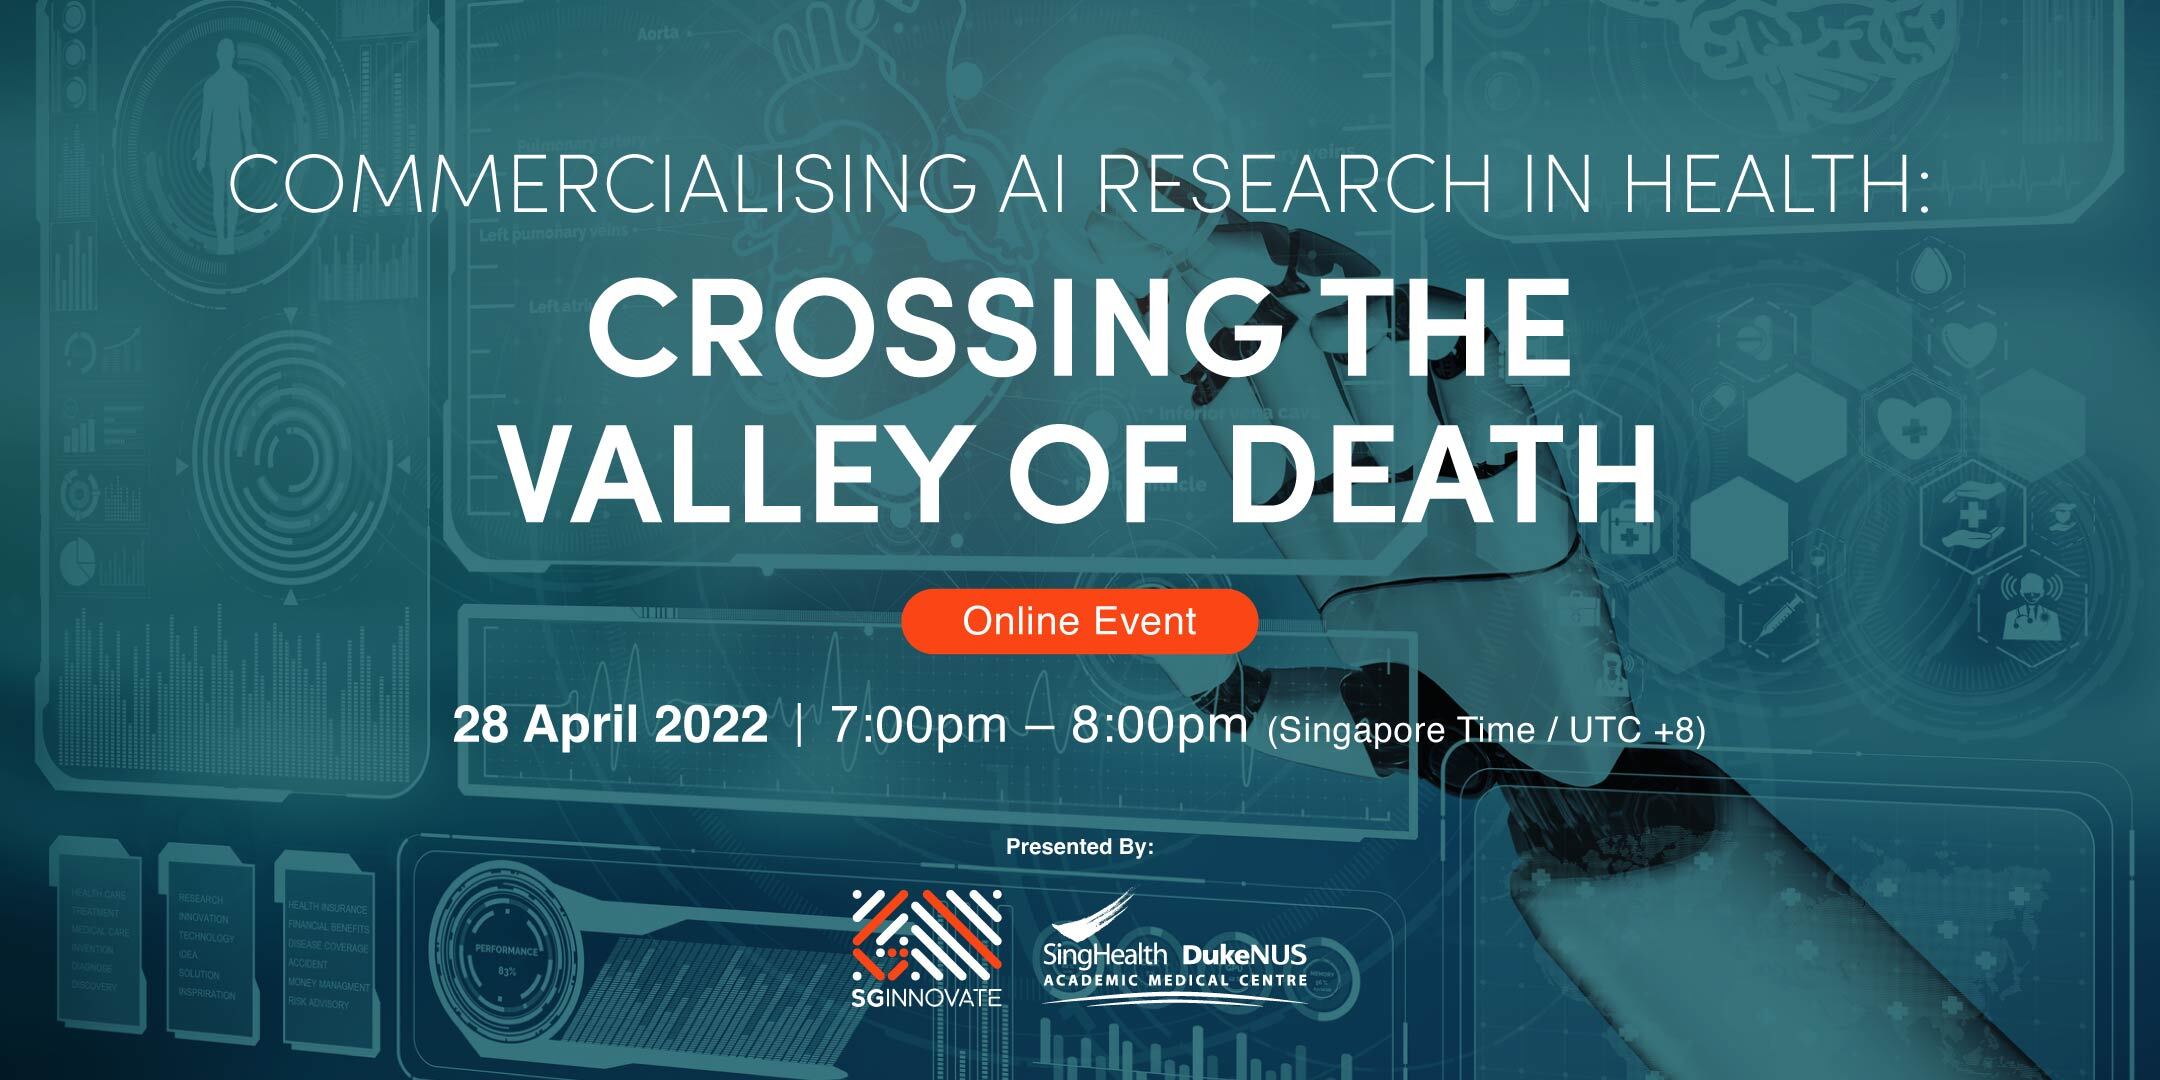 Commercialising AI Research in Health: Crossing the Valley of Death